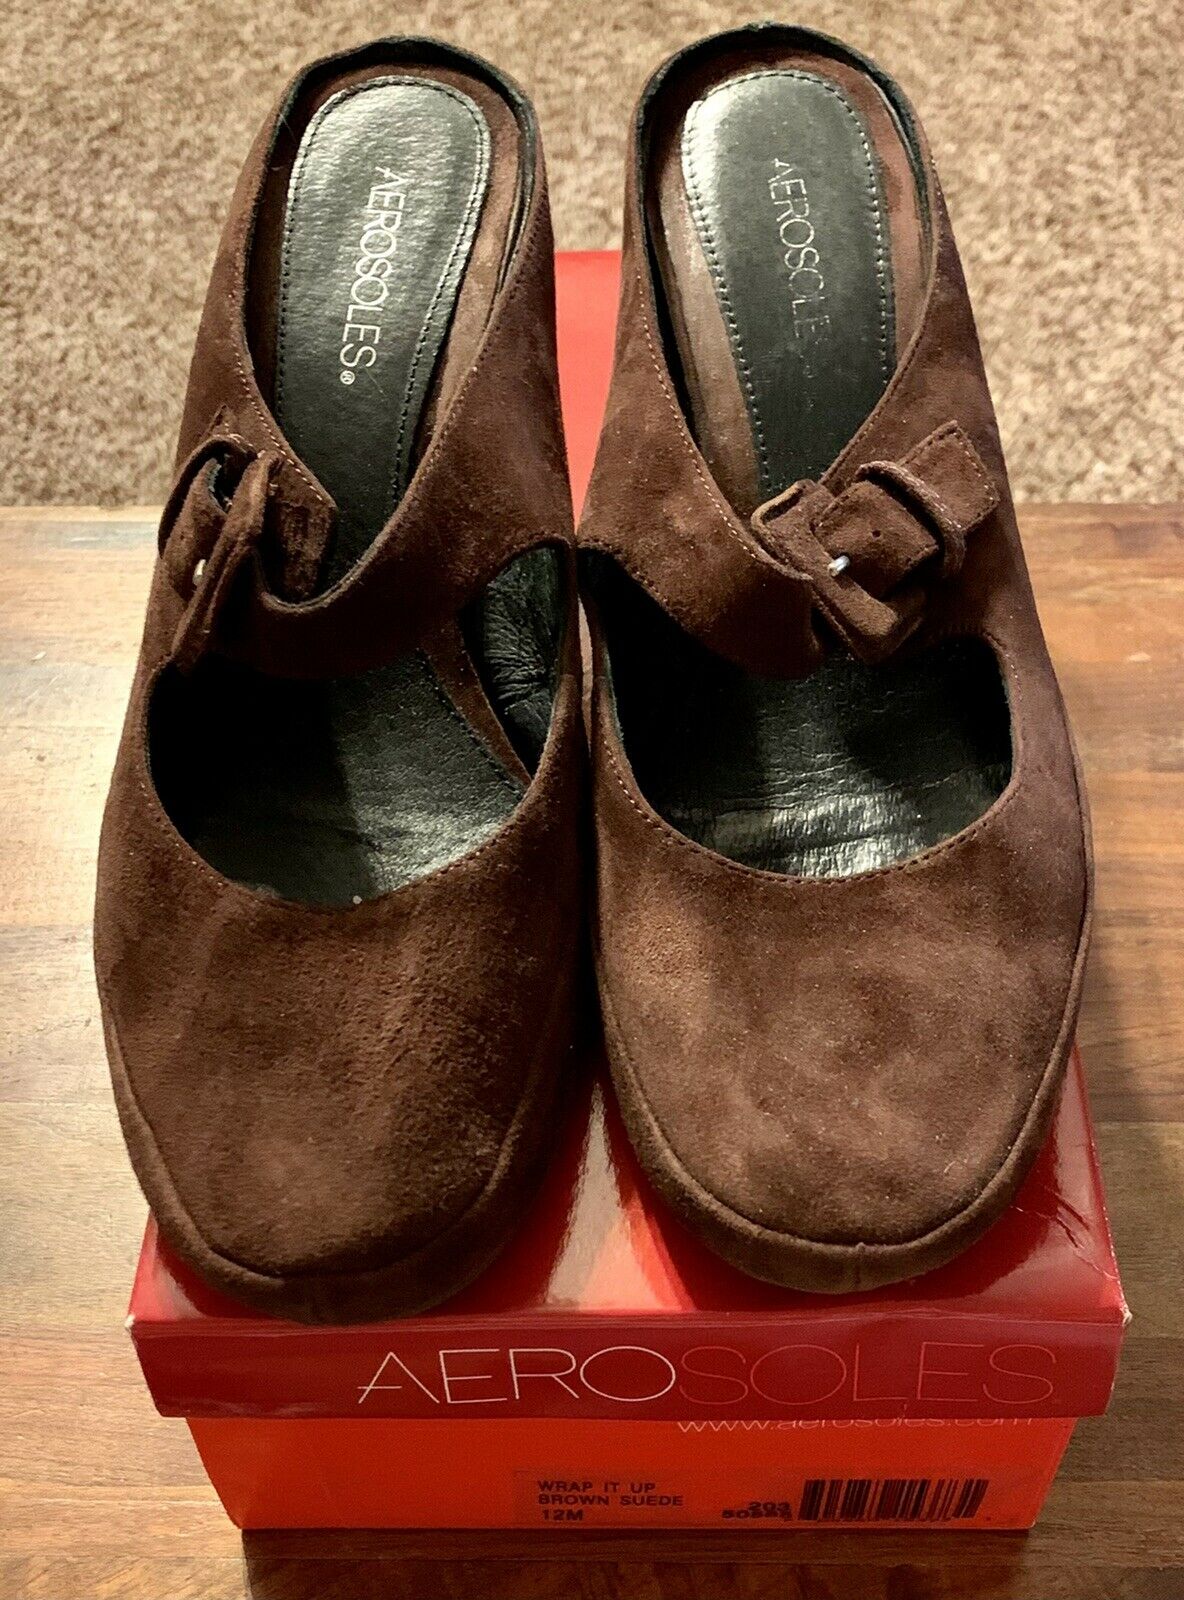 Women’s Aerosoles Wrap It Up Brown Suede Embroidered 12 M Shoes Slides Mules EUC